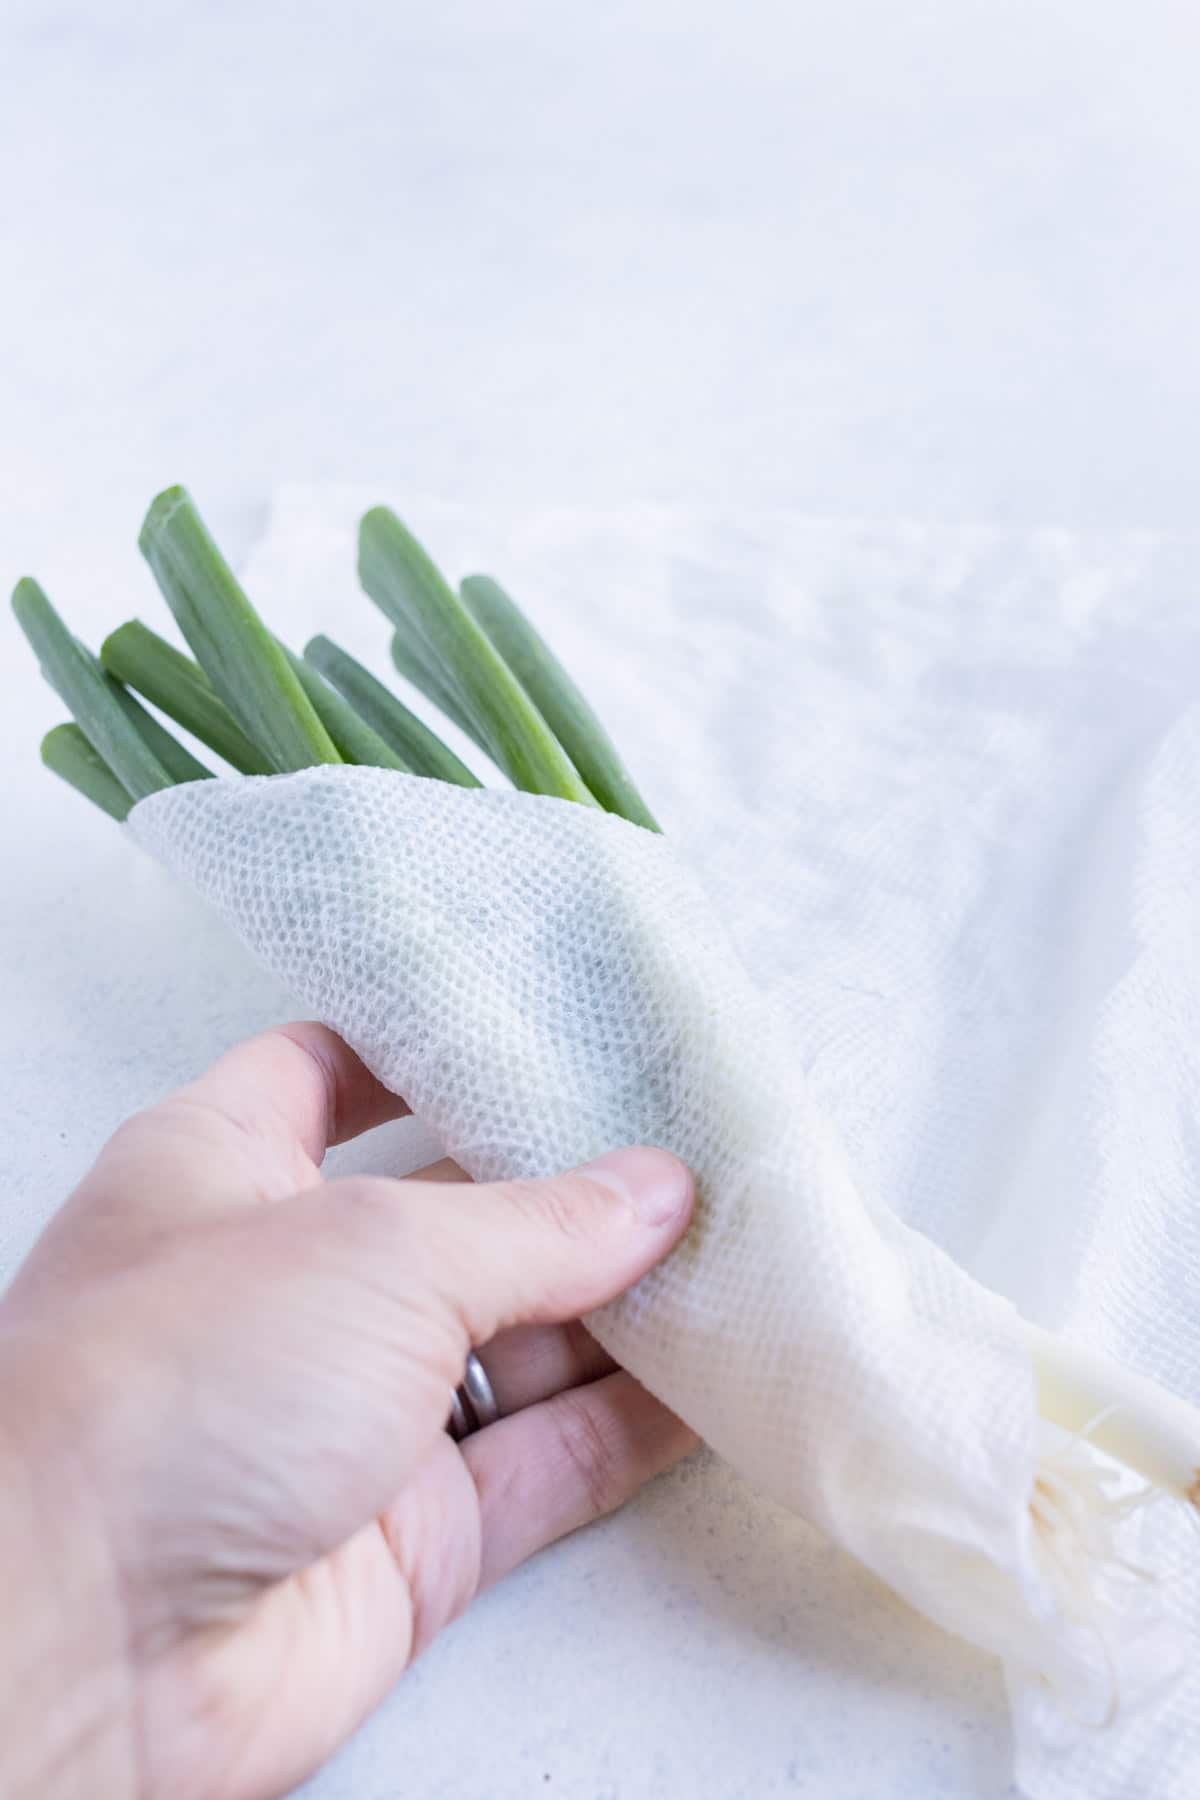 A wet paper towel is wrapped around the green onions.